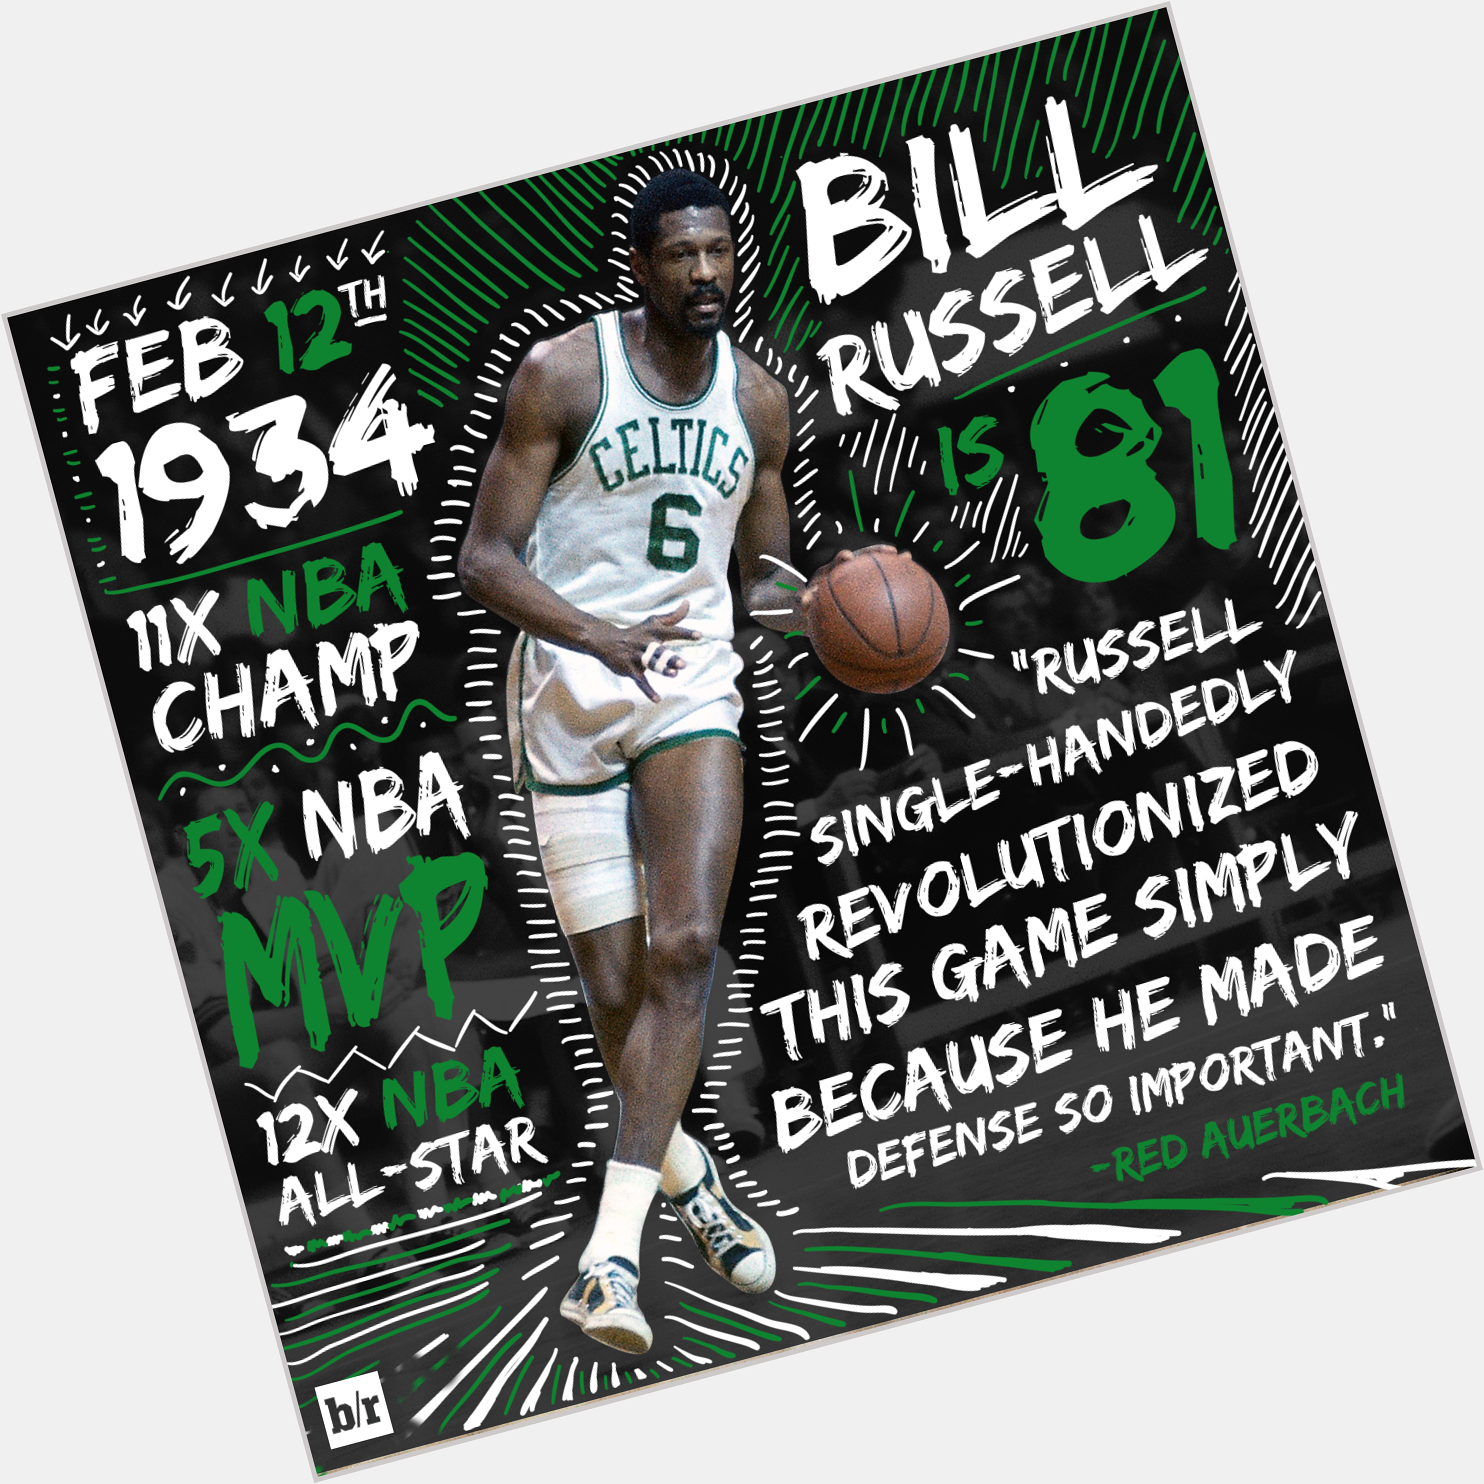 Happy 81st birthday to the great Bill Russell! 